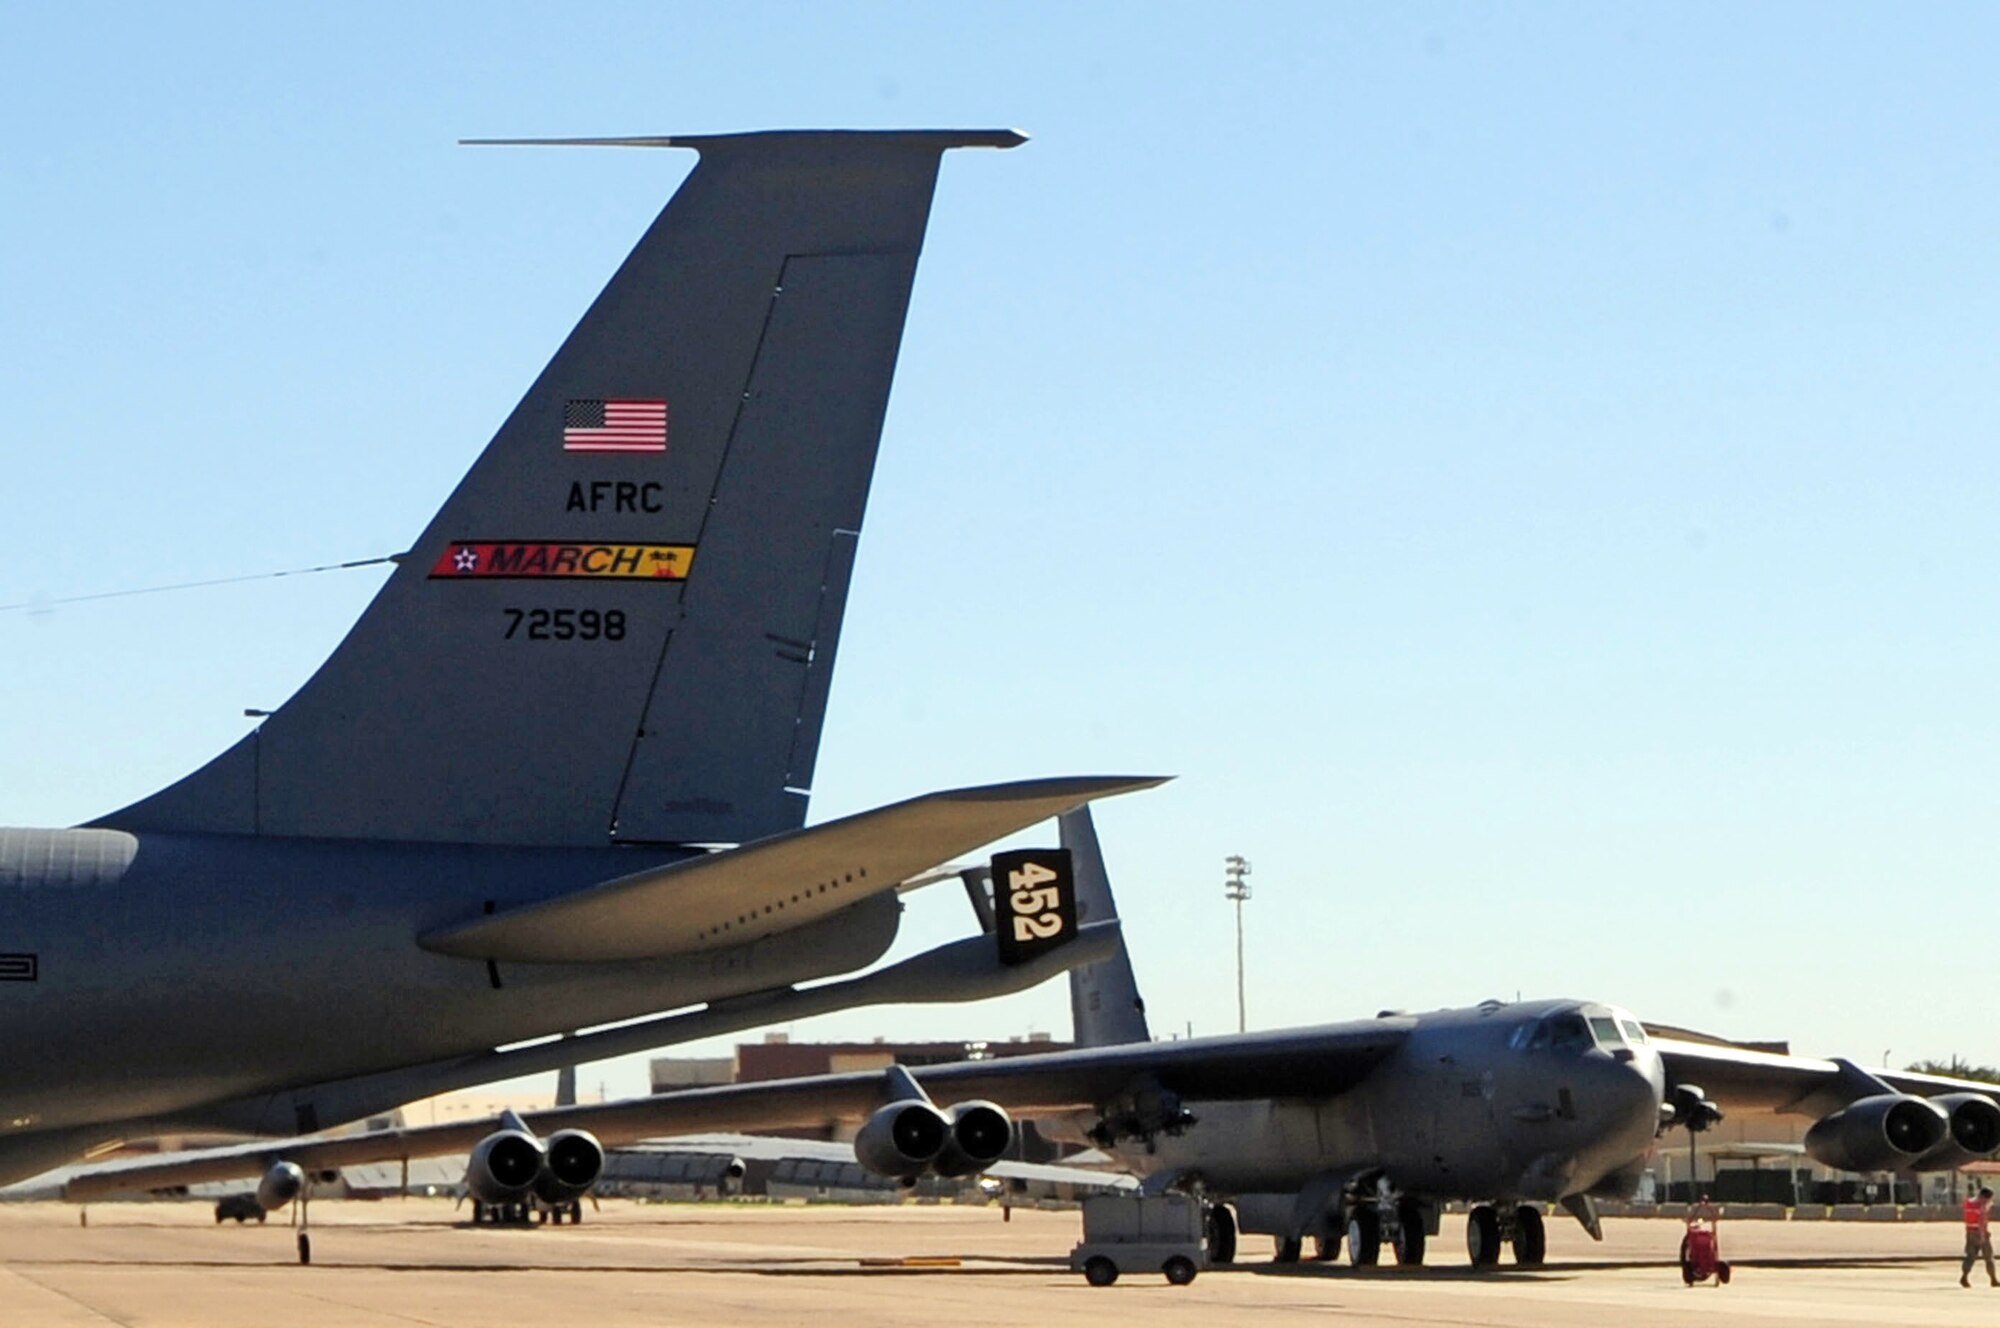 A KC-135 from the 336th Air Refueling Squadron out of March Air Reserve Base, Calif., prepares to take off while a B-52 from the 2d Bomb Wing sits on the runway. The refueler was deployed to Barksdale Air Force Base, La., to participate in refueling training. (Senior Airman Joanna M. Kresge/U.S. Air Force)